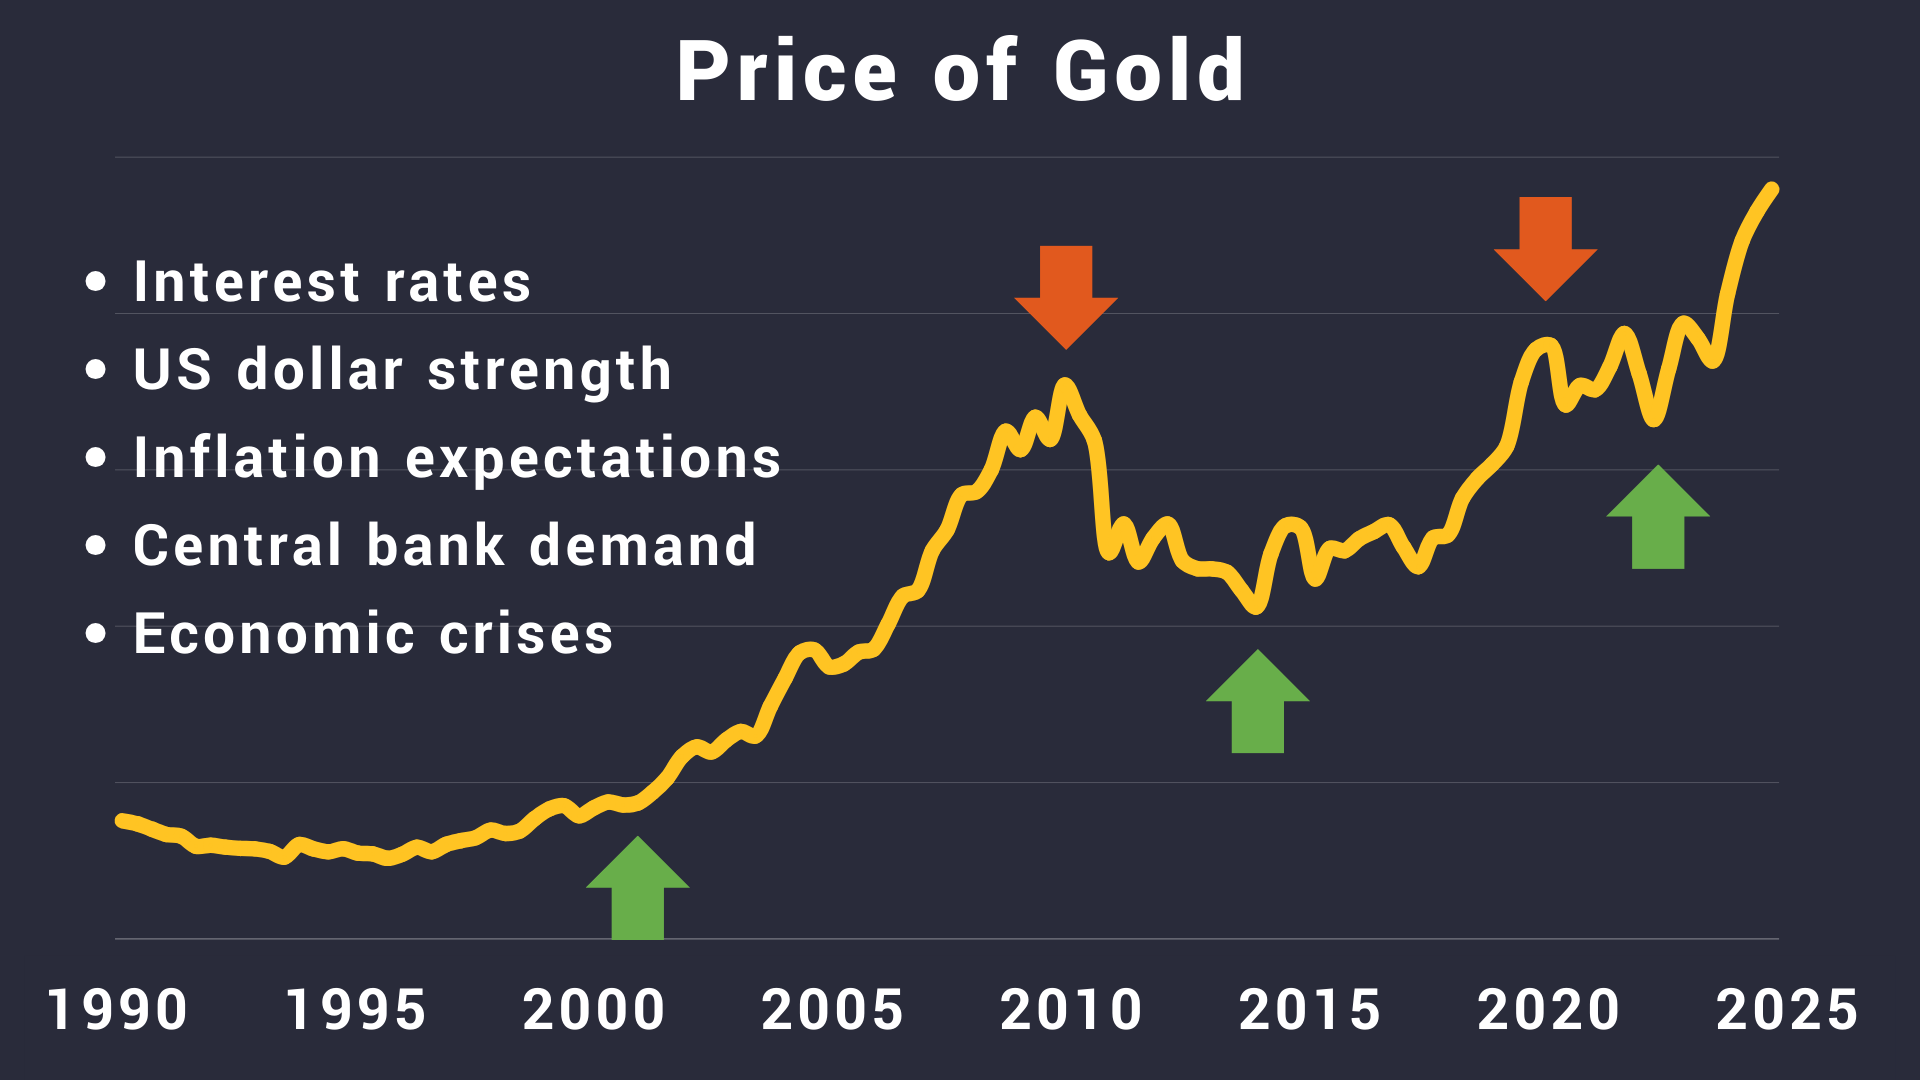 Factors driving the gold price